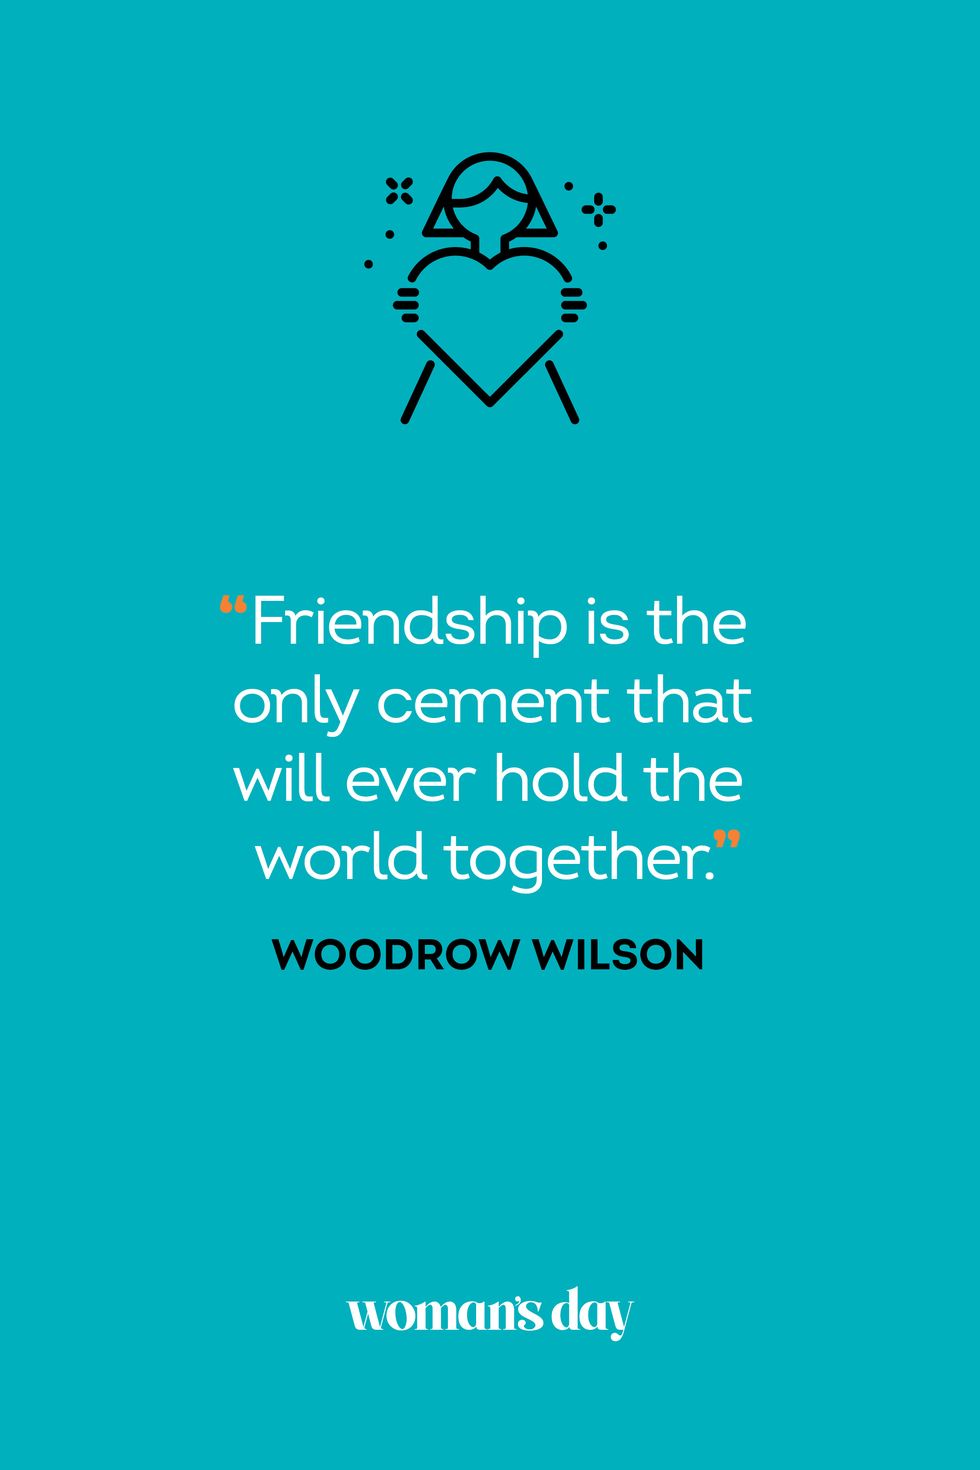 15 Cute Friendship Quotes to Share With Your Best Friend